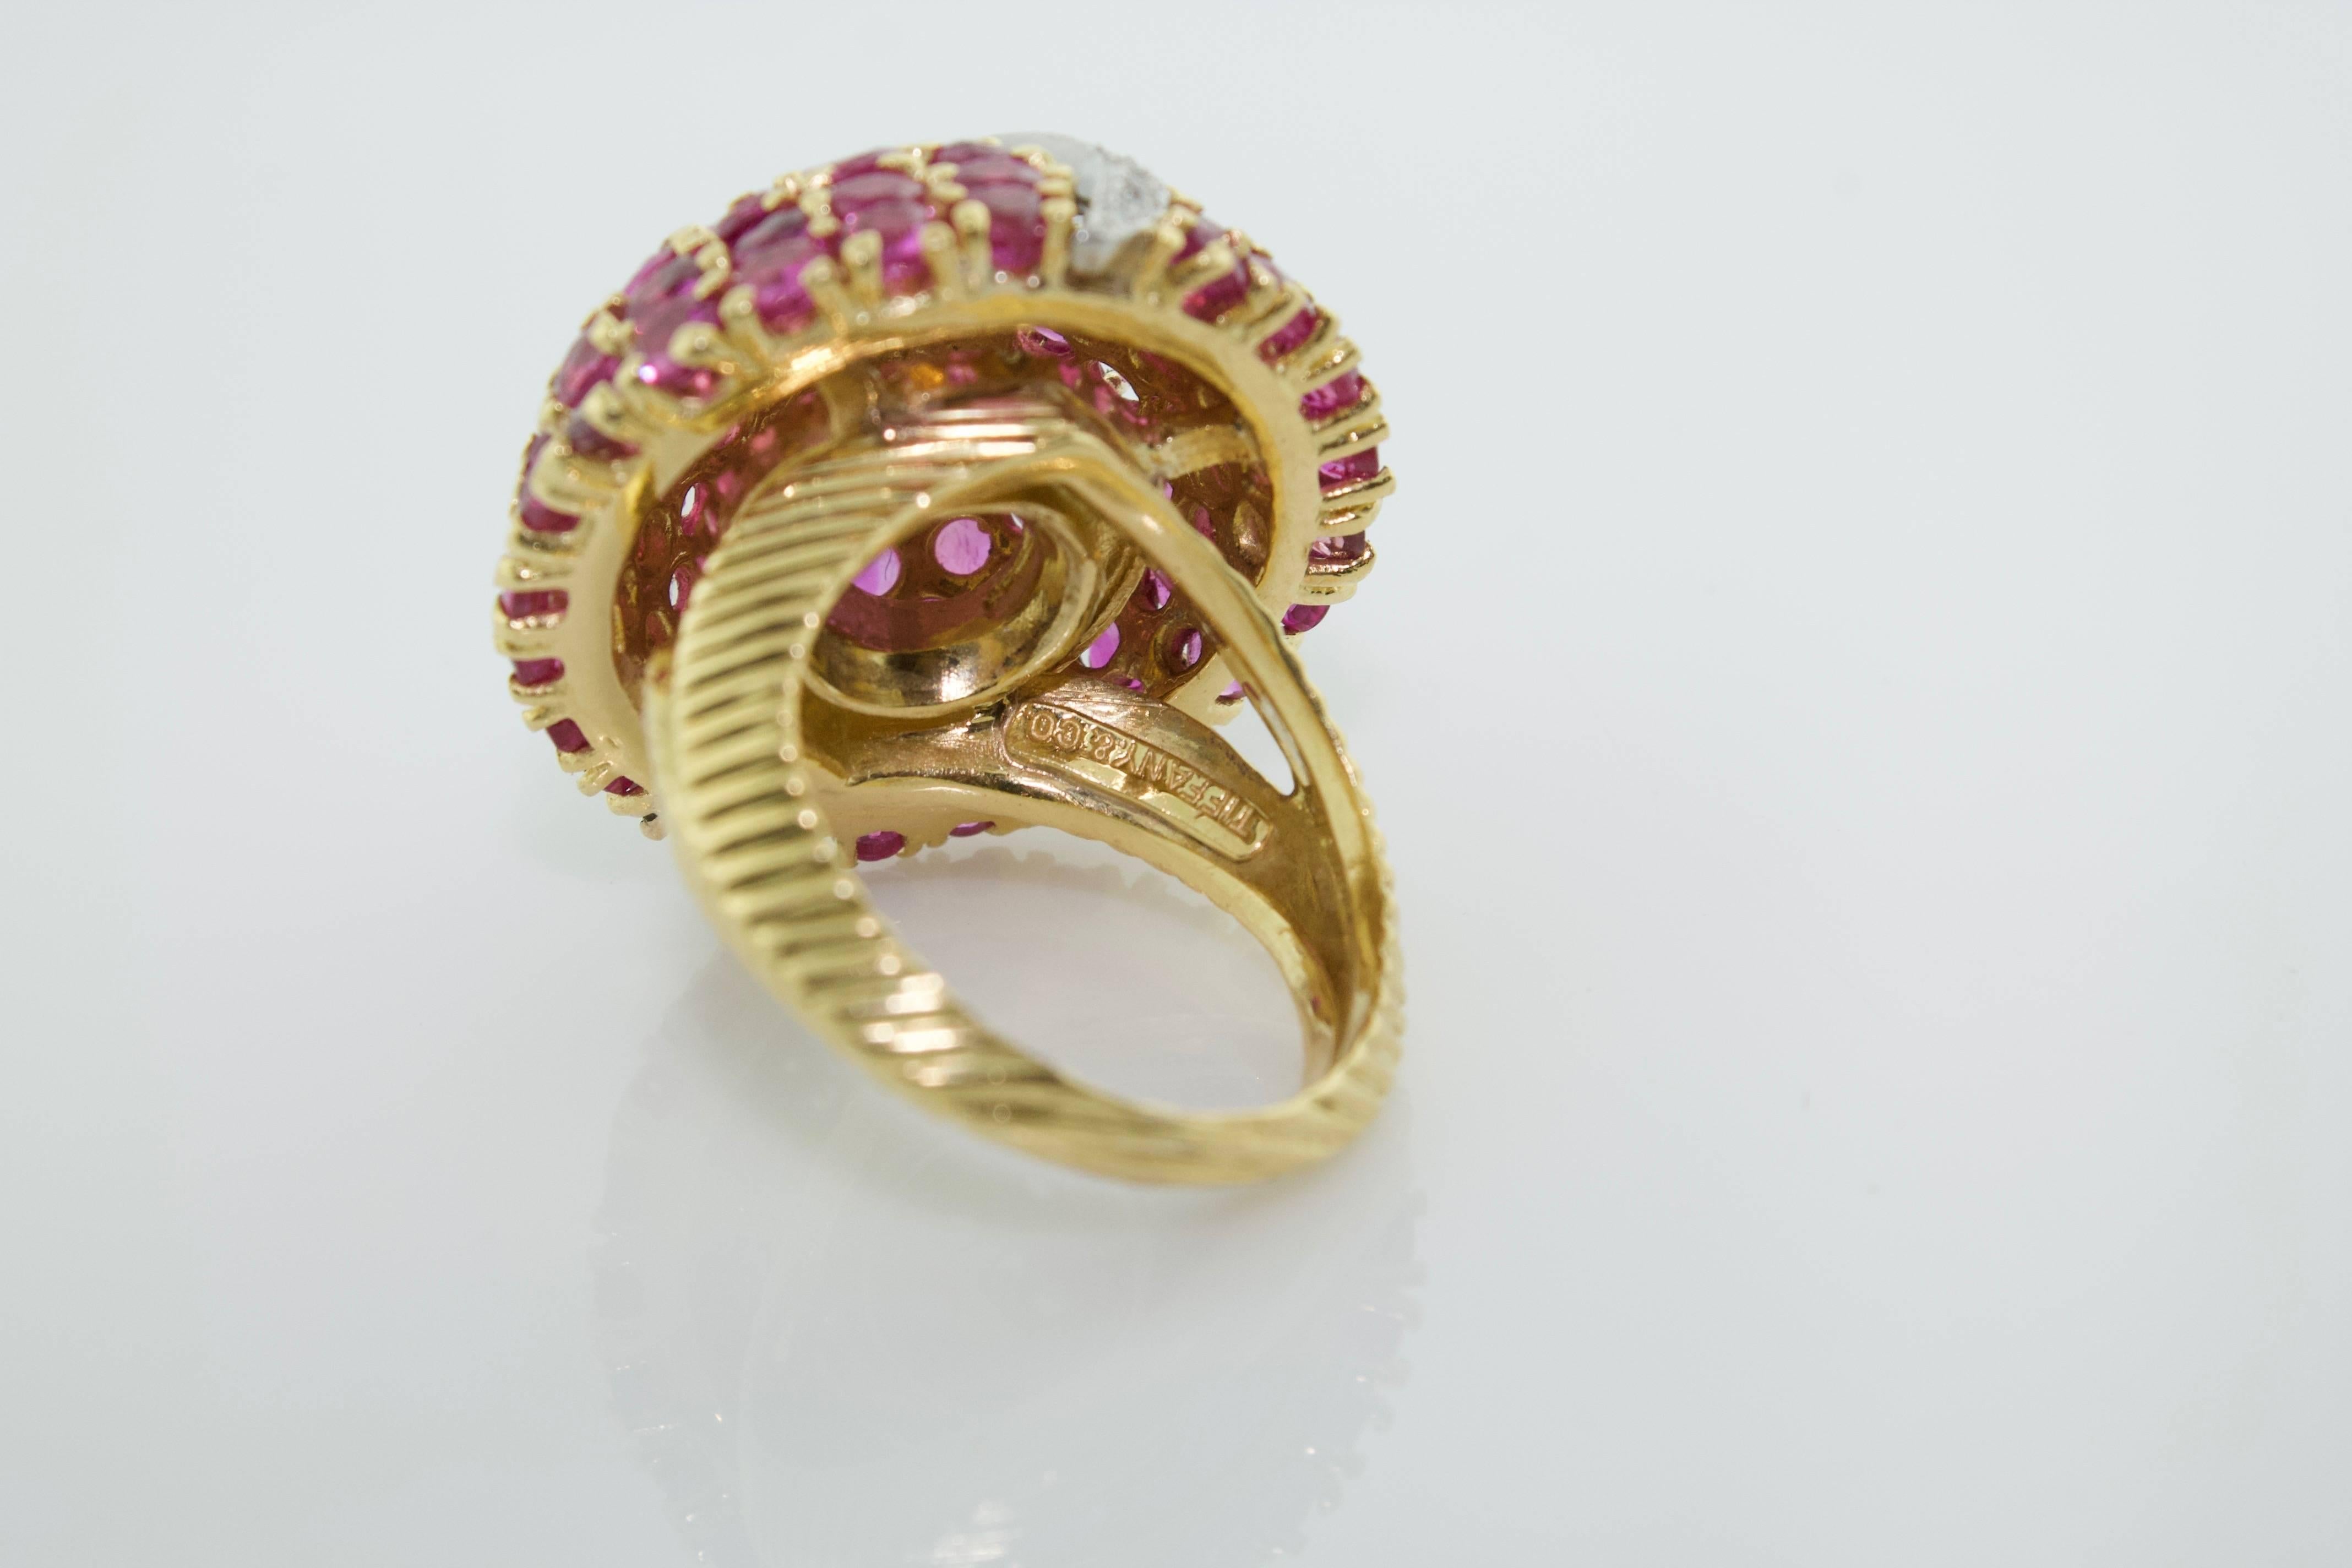 Tiffany & Co. Ruby and Diamond Dome Ring Circa 1940's
.55 in Round Diamonds Color GH Clarity VVS-SI1
6.00 Carats of Round Rubies in 18 Carat Yellow Gold
Ring Size 6.5 Purchased From a Renowned Hollywood Family Who Stipulated That They Remain